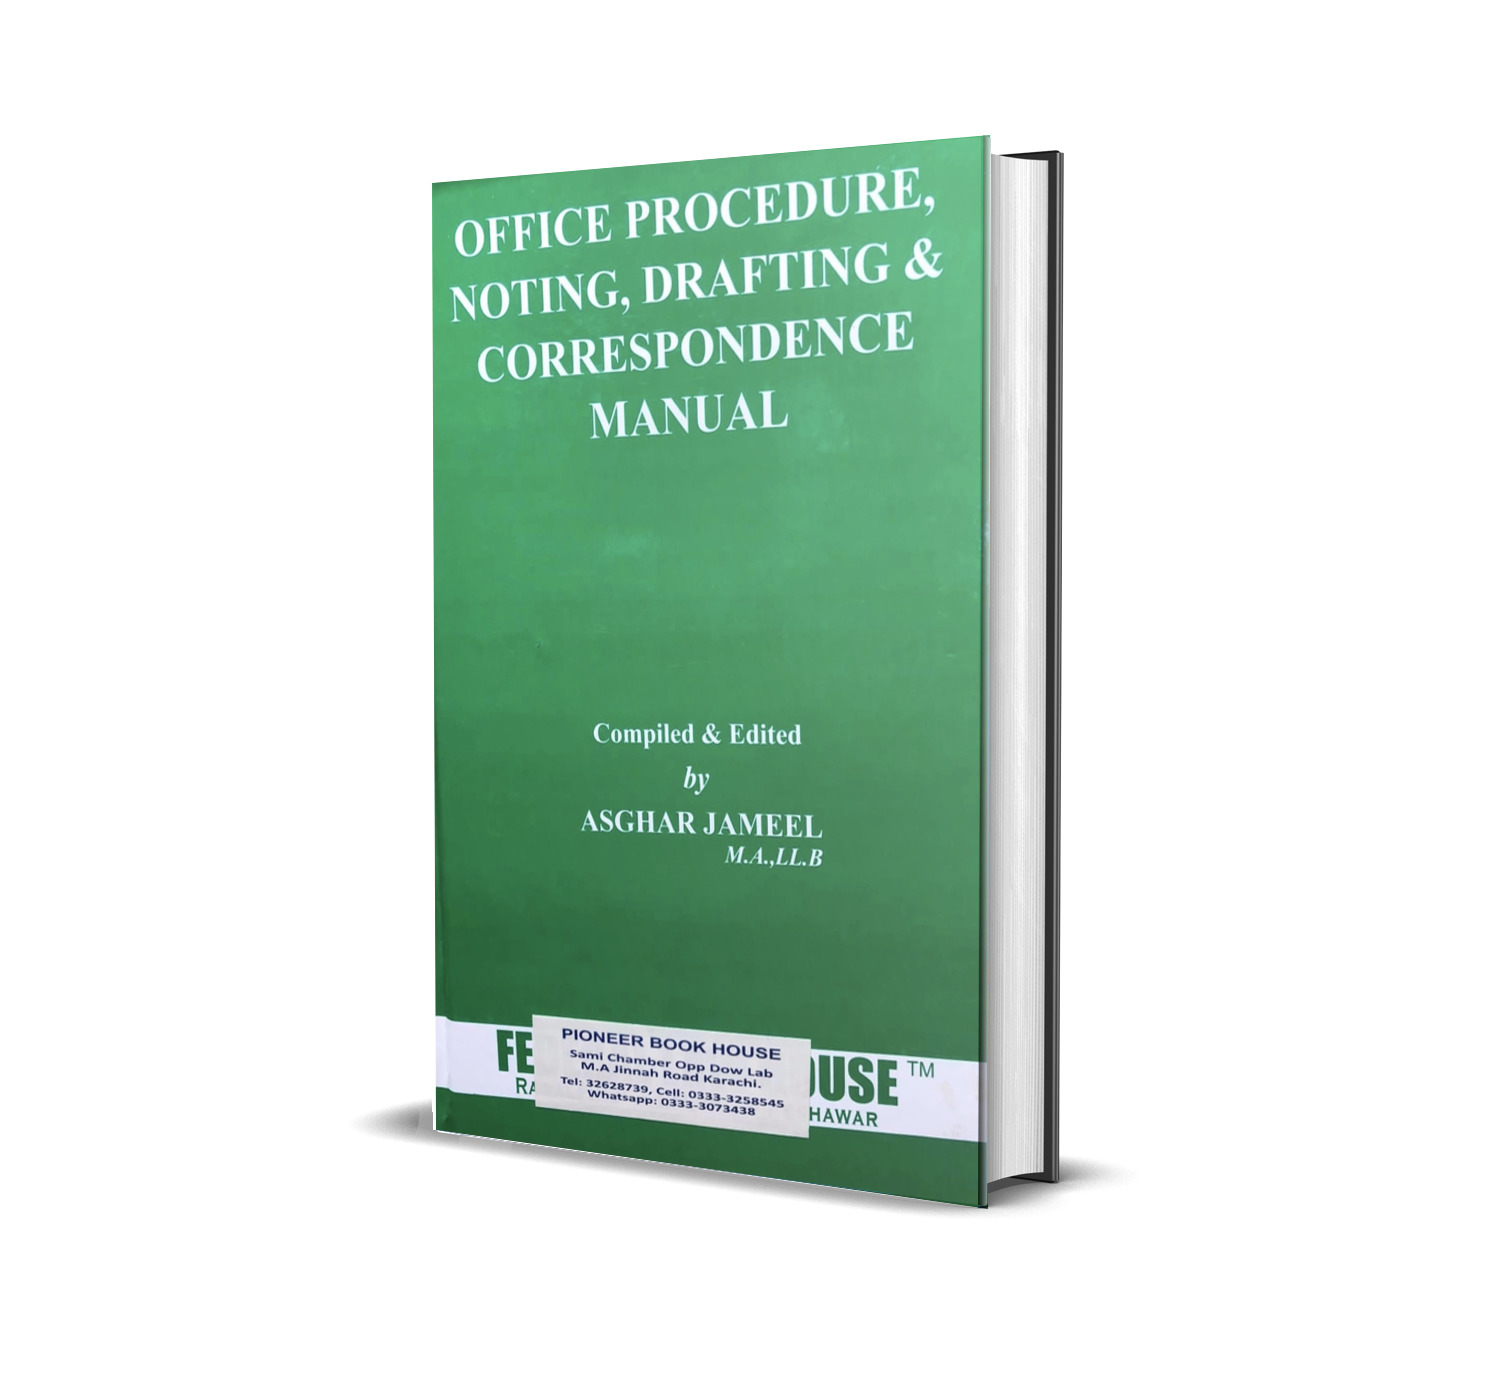 noting and drafting book free download